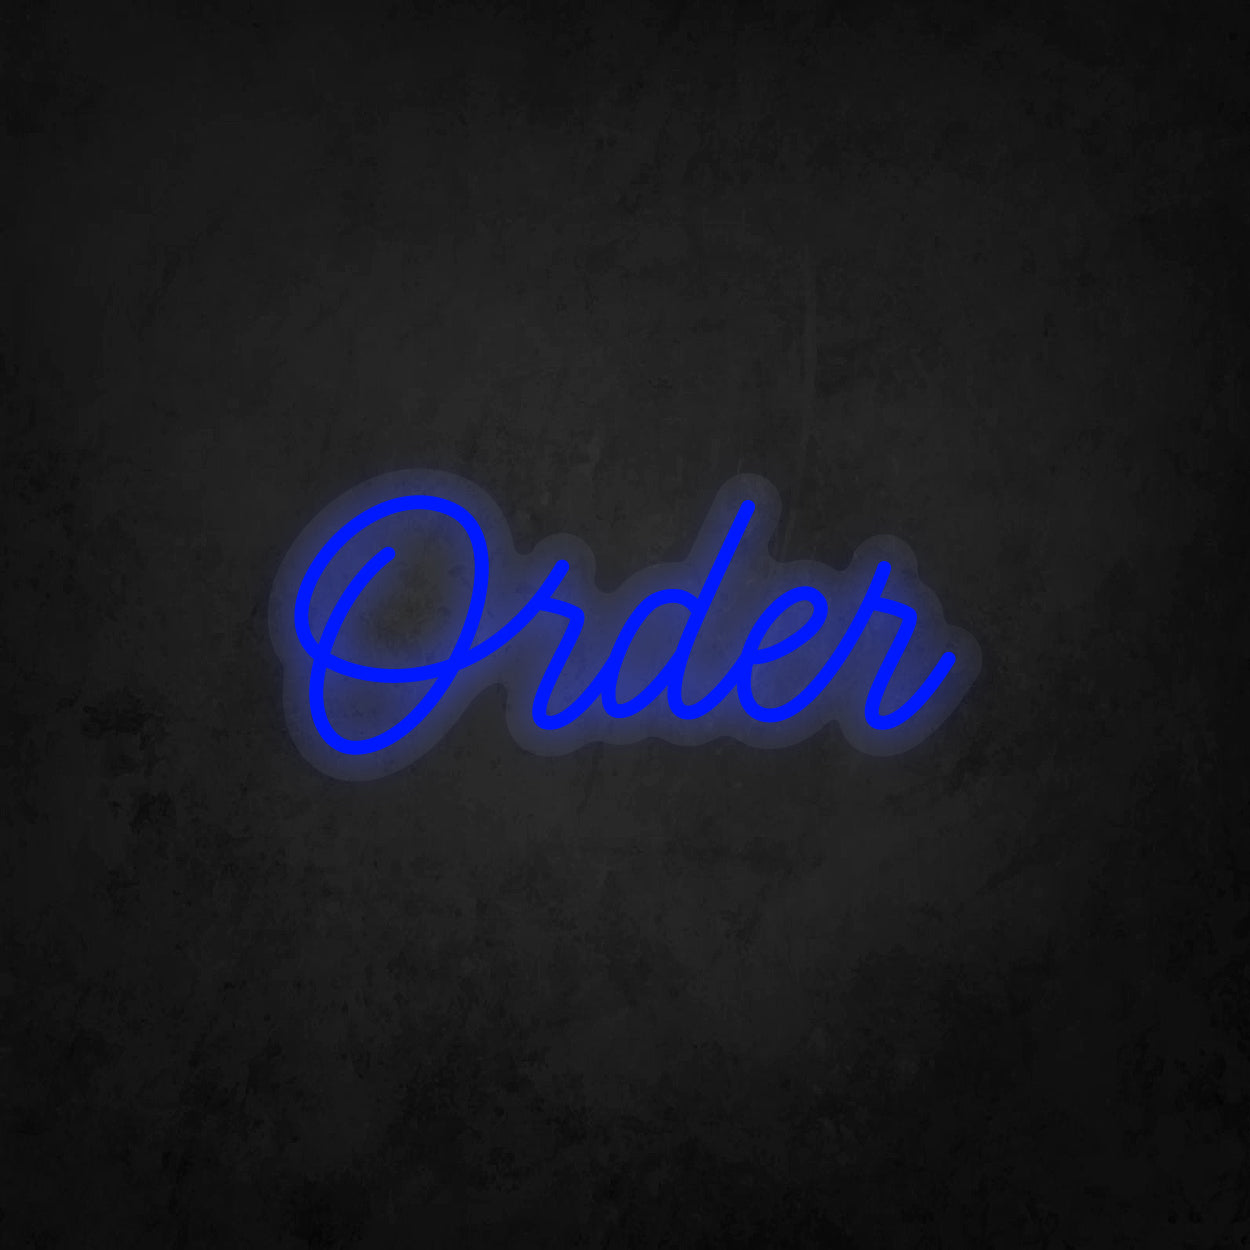 LED Neon Sign - Order Calligraphy